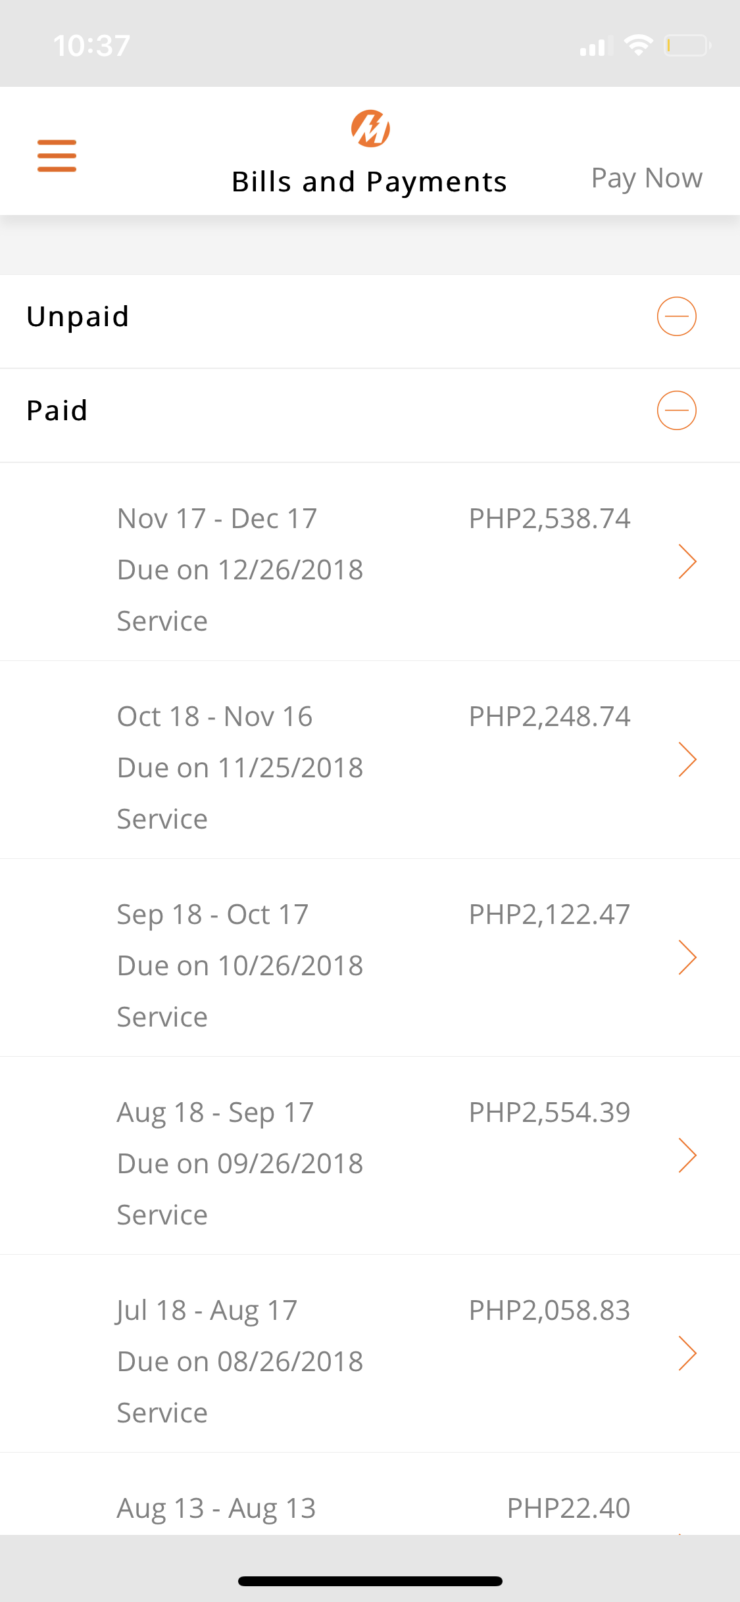 View all your paid and unpaid bills with the Meralco Mobile